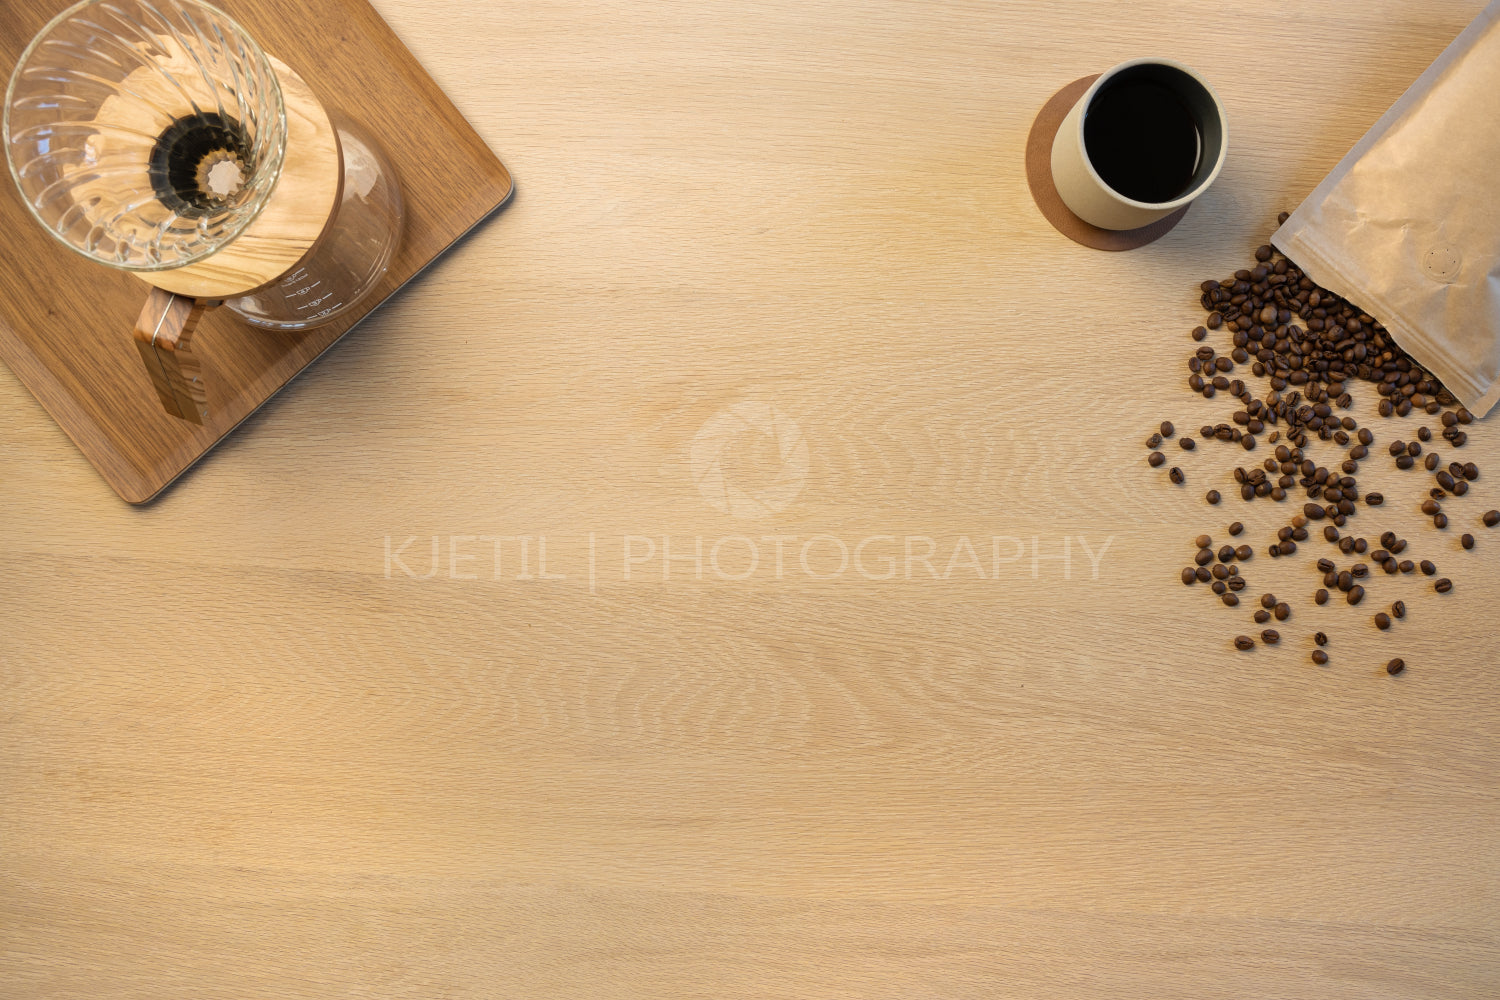 Overhead view of coffee beans with cup and filtration containers on table